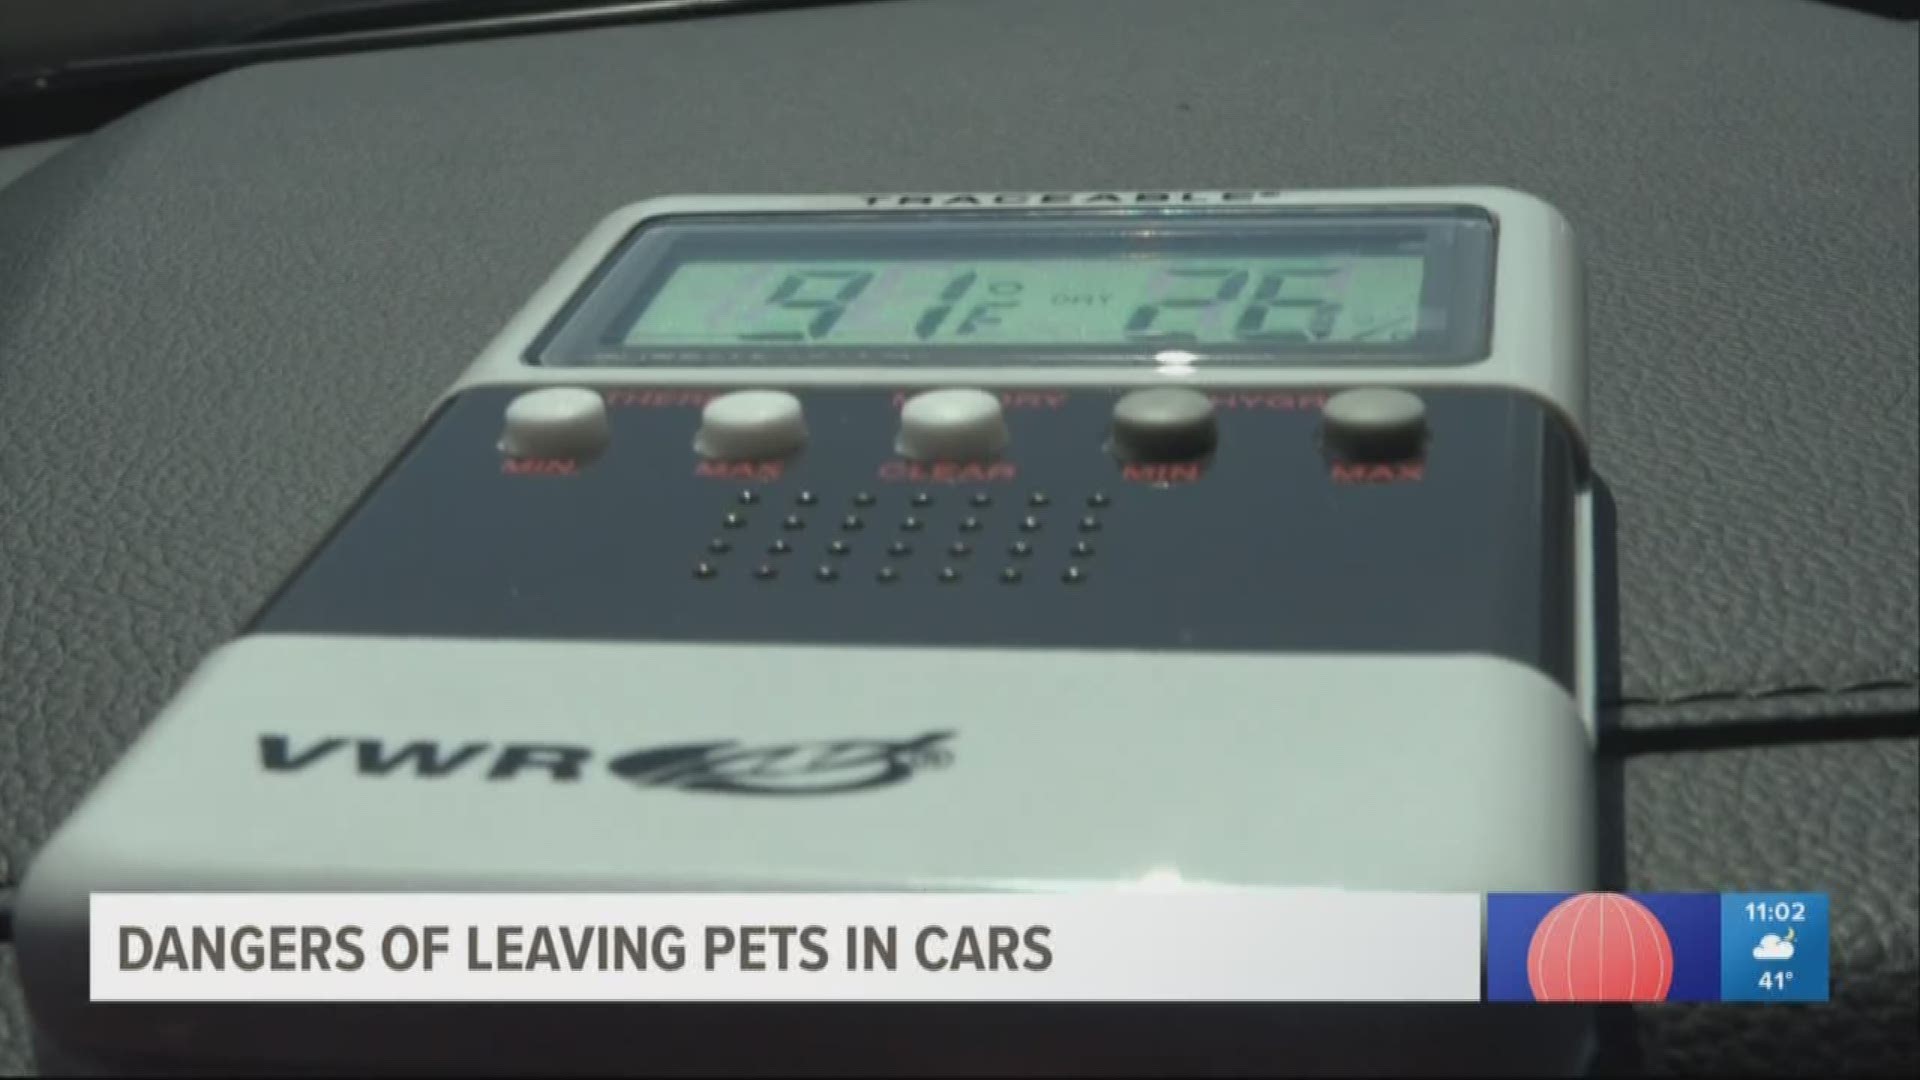 The dangers of leaving pets in cars